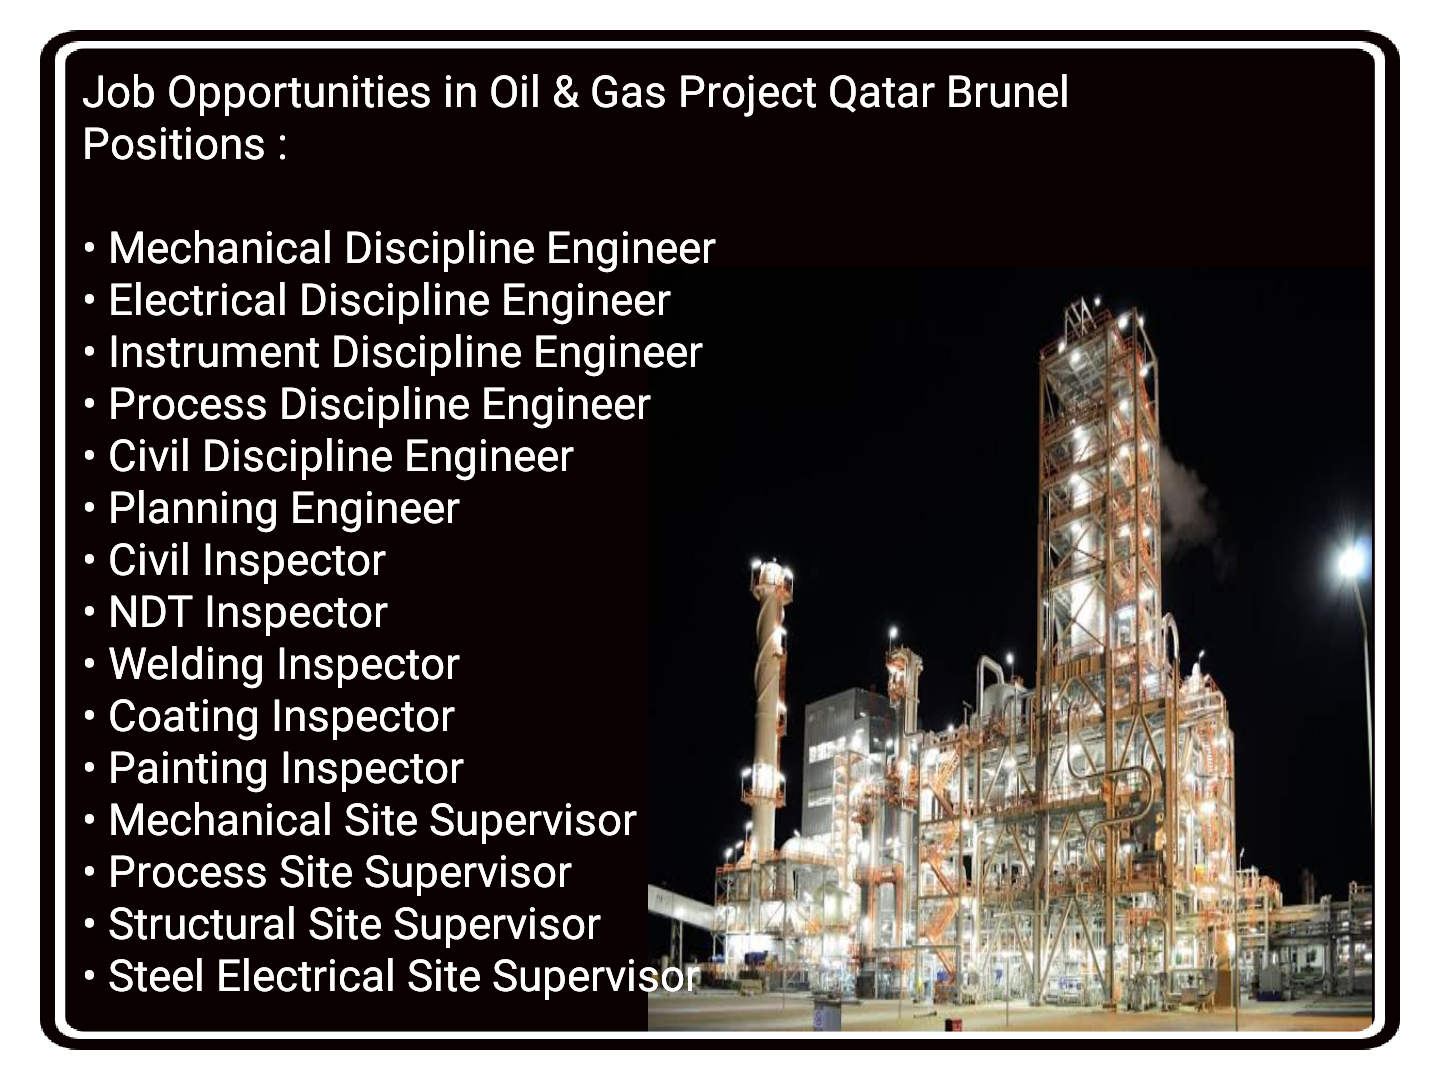 Mechanical, Electrical, Instrument, Painting, Coating & Process Discipline Engineer & Site Supervisor Jobs